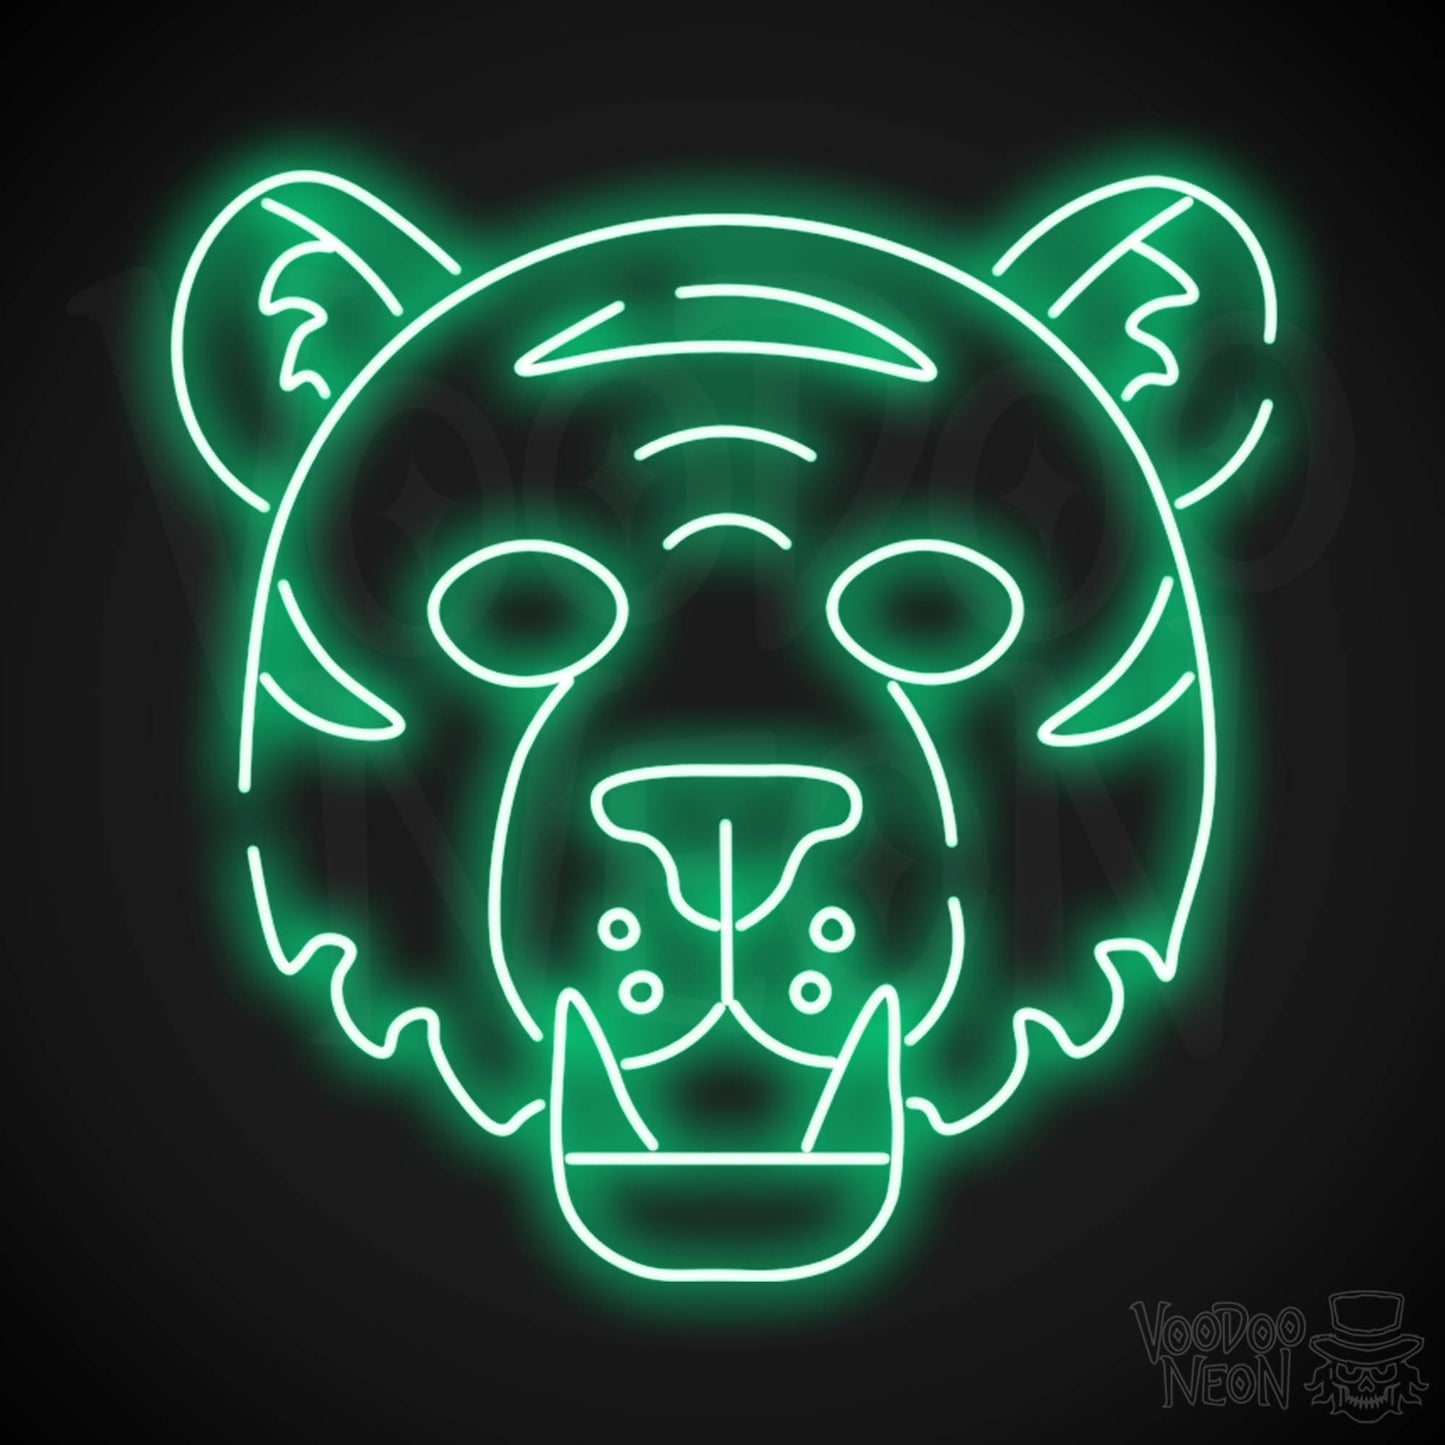 Neon Tiger Wall Art - Neon Tiger Sign - Tiger Neon Sign - LED Sign - Color Green